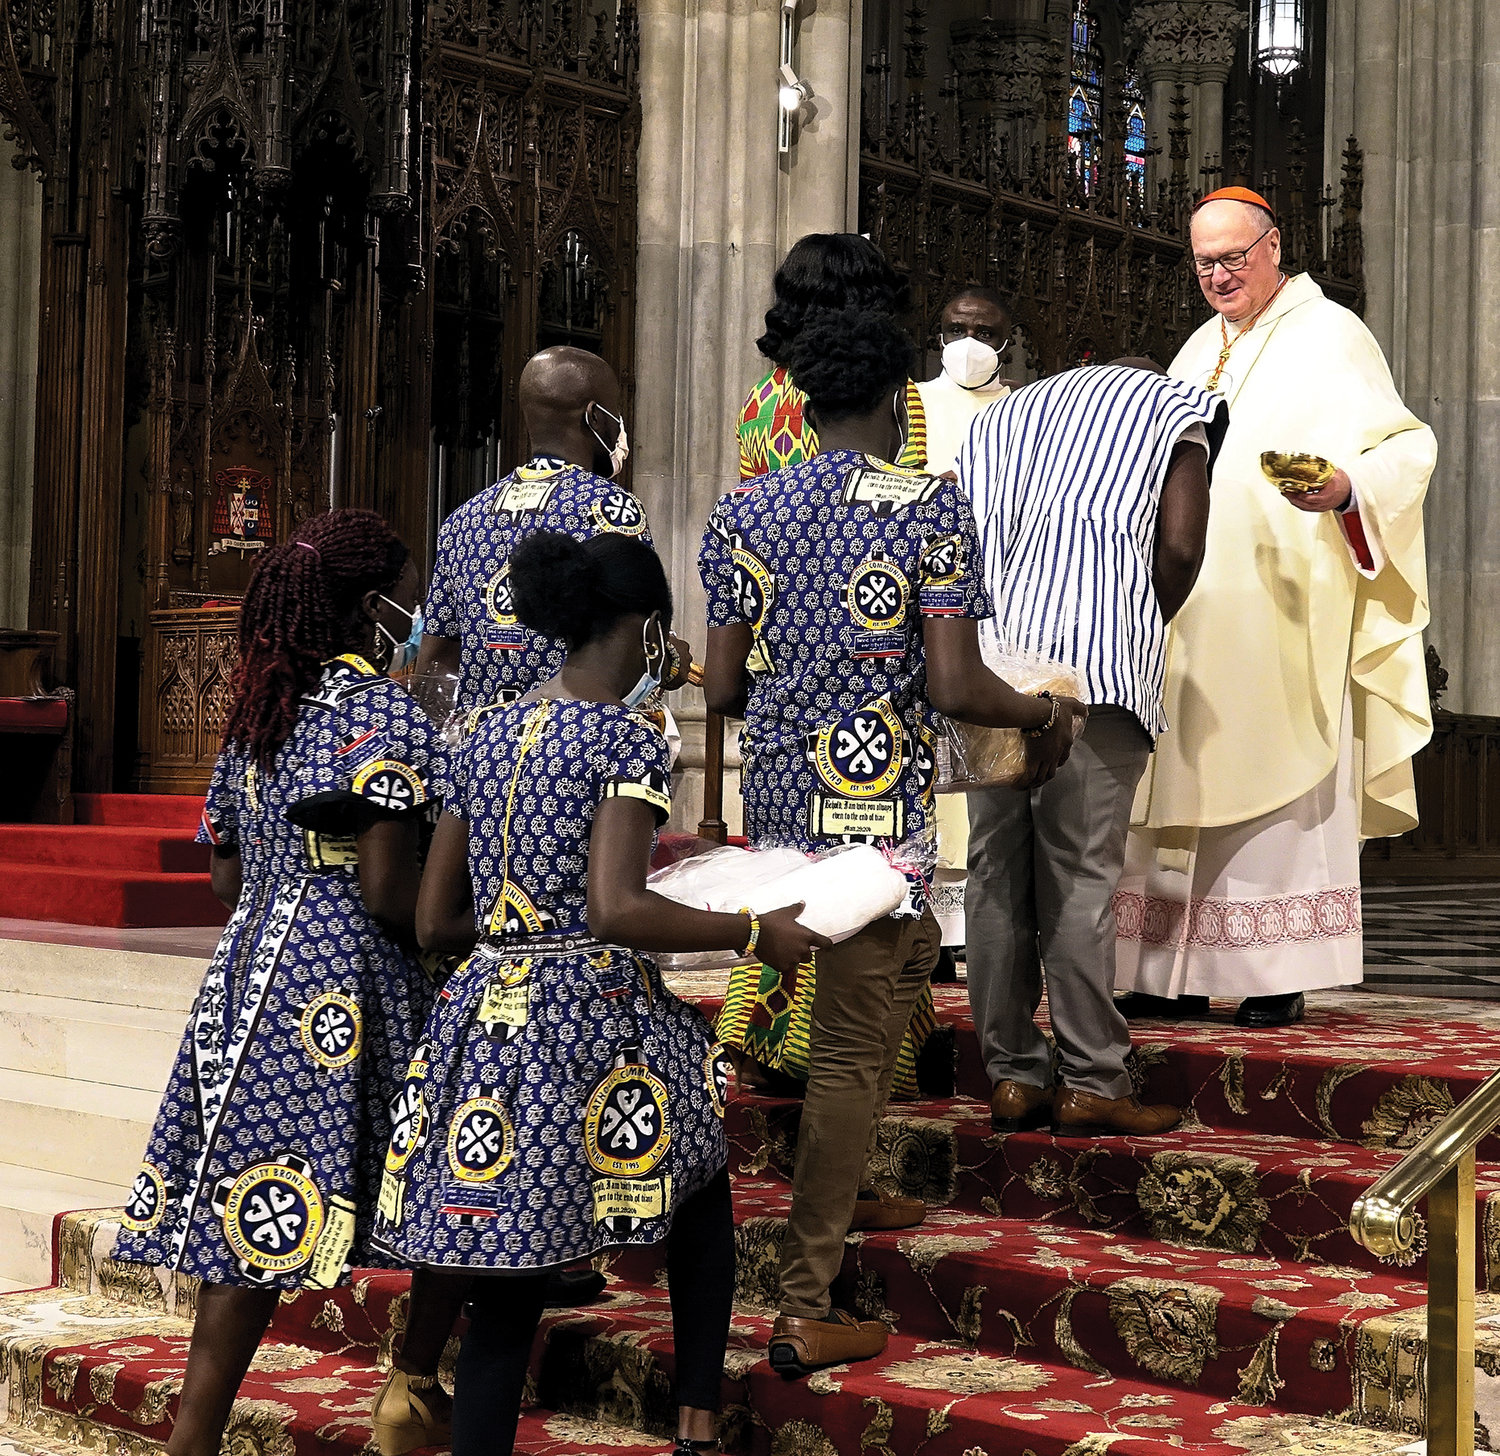 Cardinal Dolan receives the offertory gifts Feb. 6 during the annual Black History Month Mass at St. Patrick’s Cathedral.